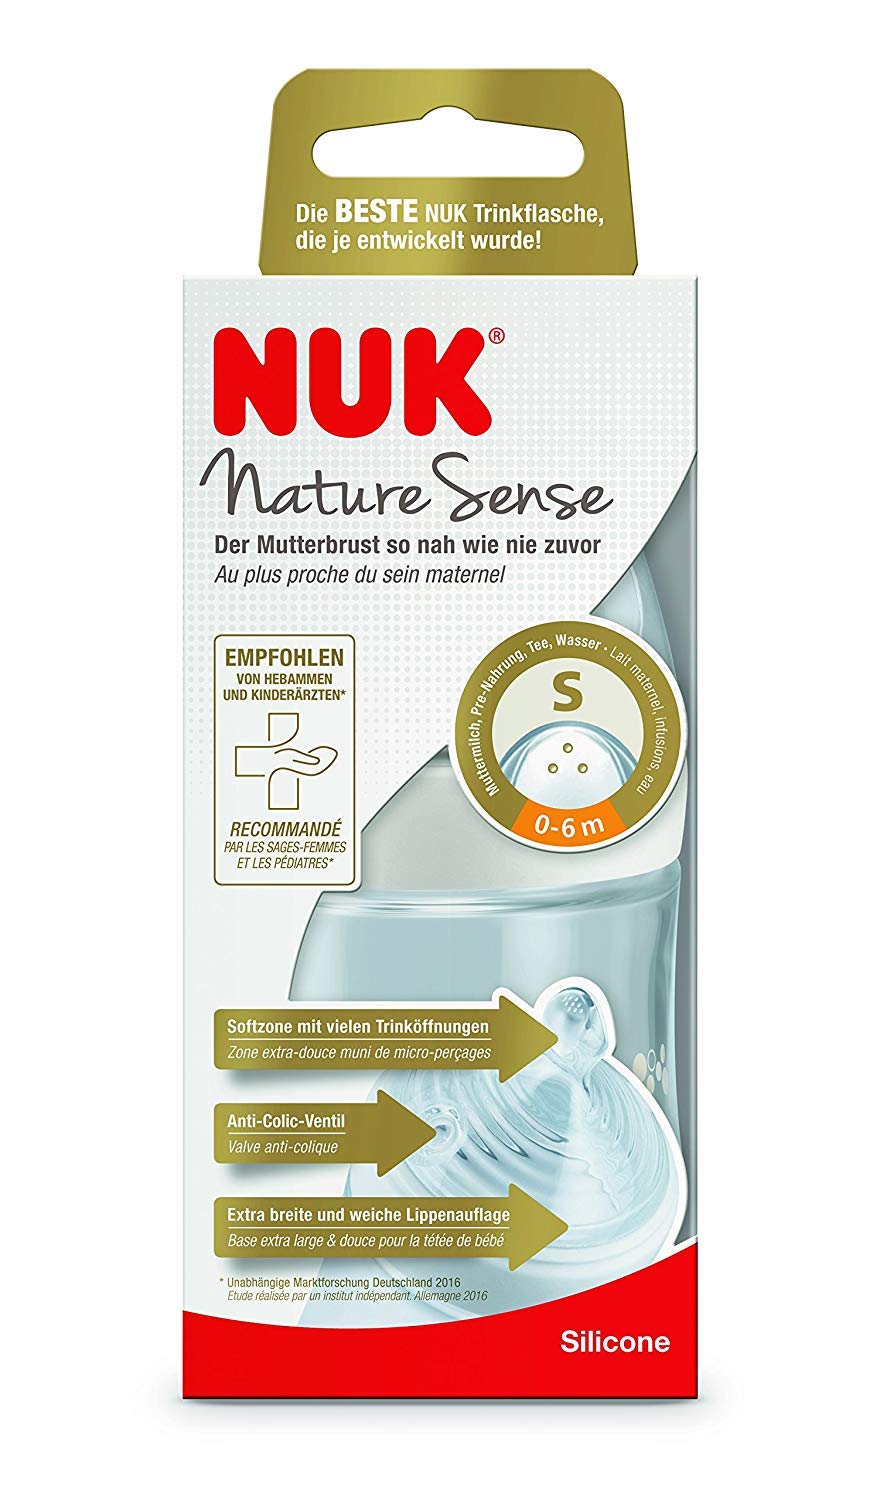 NUK Nature Sense Baby Bottle, 0-6 Months, S (Tea) with Breast-like Silicone